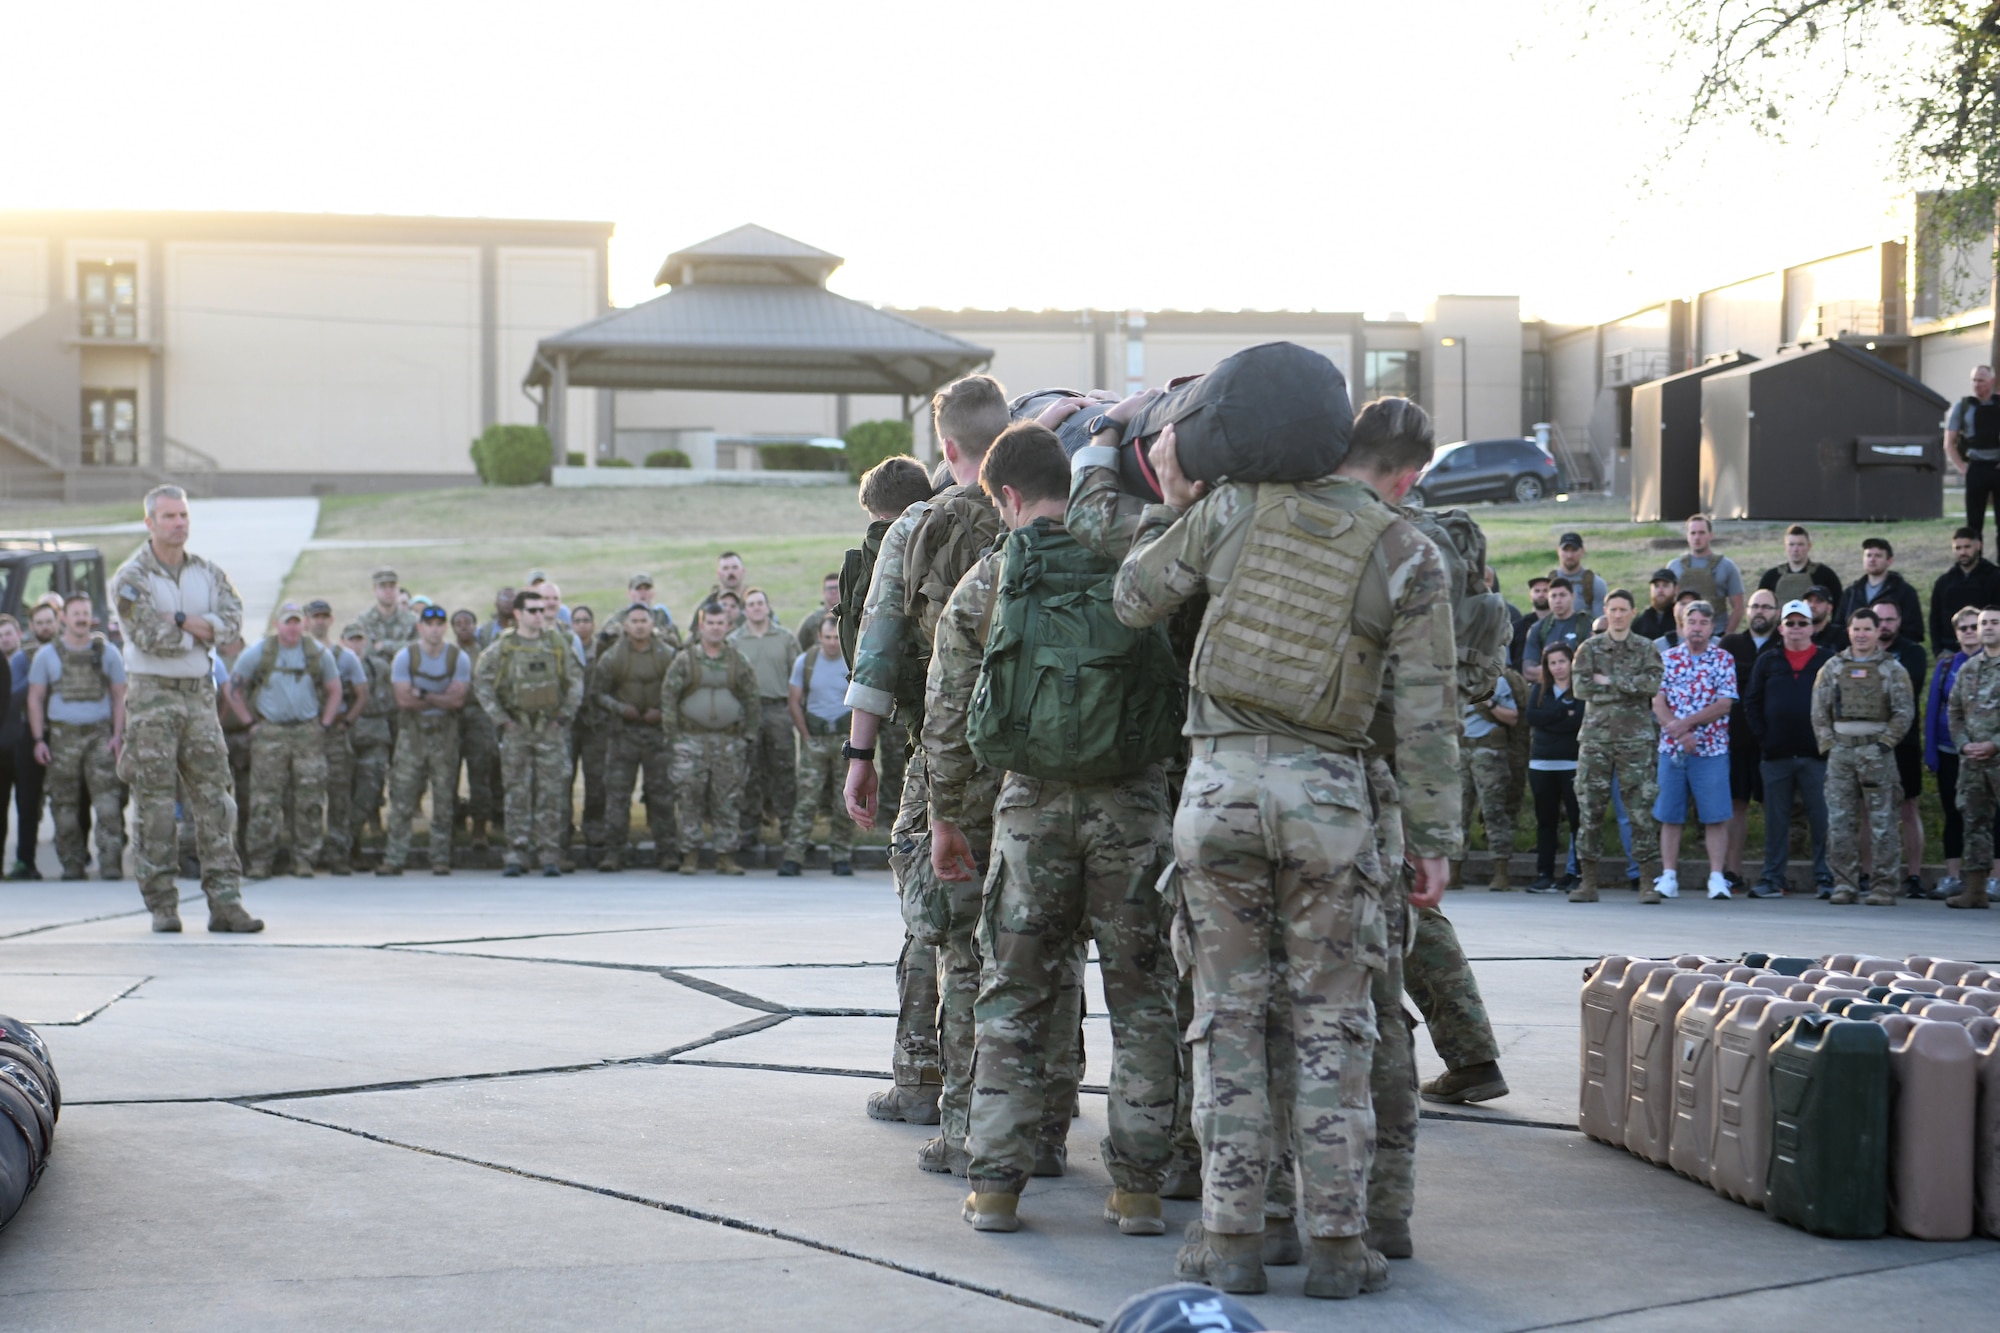 U.S. Air Force Chief Master Sgt. Todd Popovic, Special Warfare Training Wing command chief, left, watches as Special Warfare Trainees demonstrate the proper way to lift and carry a "charge" prior to a two and one-half mile ruck march in during a rededication ceremony in honor of U.S. Air Force Lt. Col. William Schroeder and U.S. Air Force Staff Sgt. Scott Sather at the SWTW training compound Joint Base San Antonio, Chapman Training Annex, Apr. 8, 2022.  The wing and echelon units hosted a two and one-half mile ruck march followed by Memorial pushups and the unveiling of refitted memorials in coordination with Gold Star families (U.S. Air Force photo by Brian Boisvert)